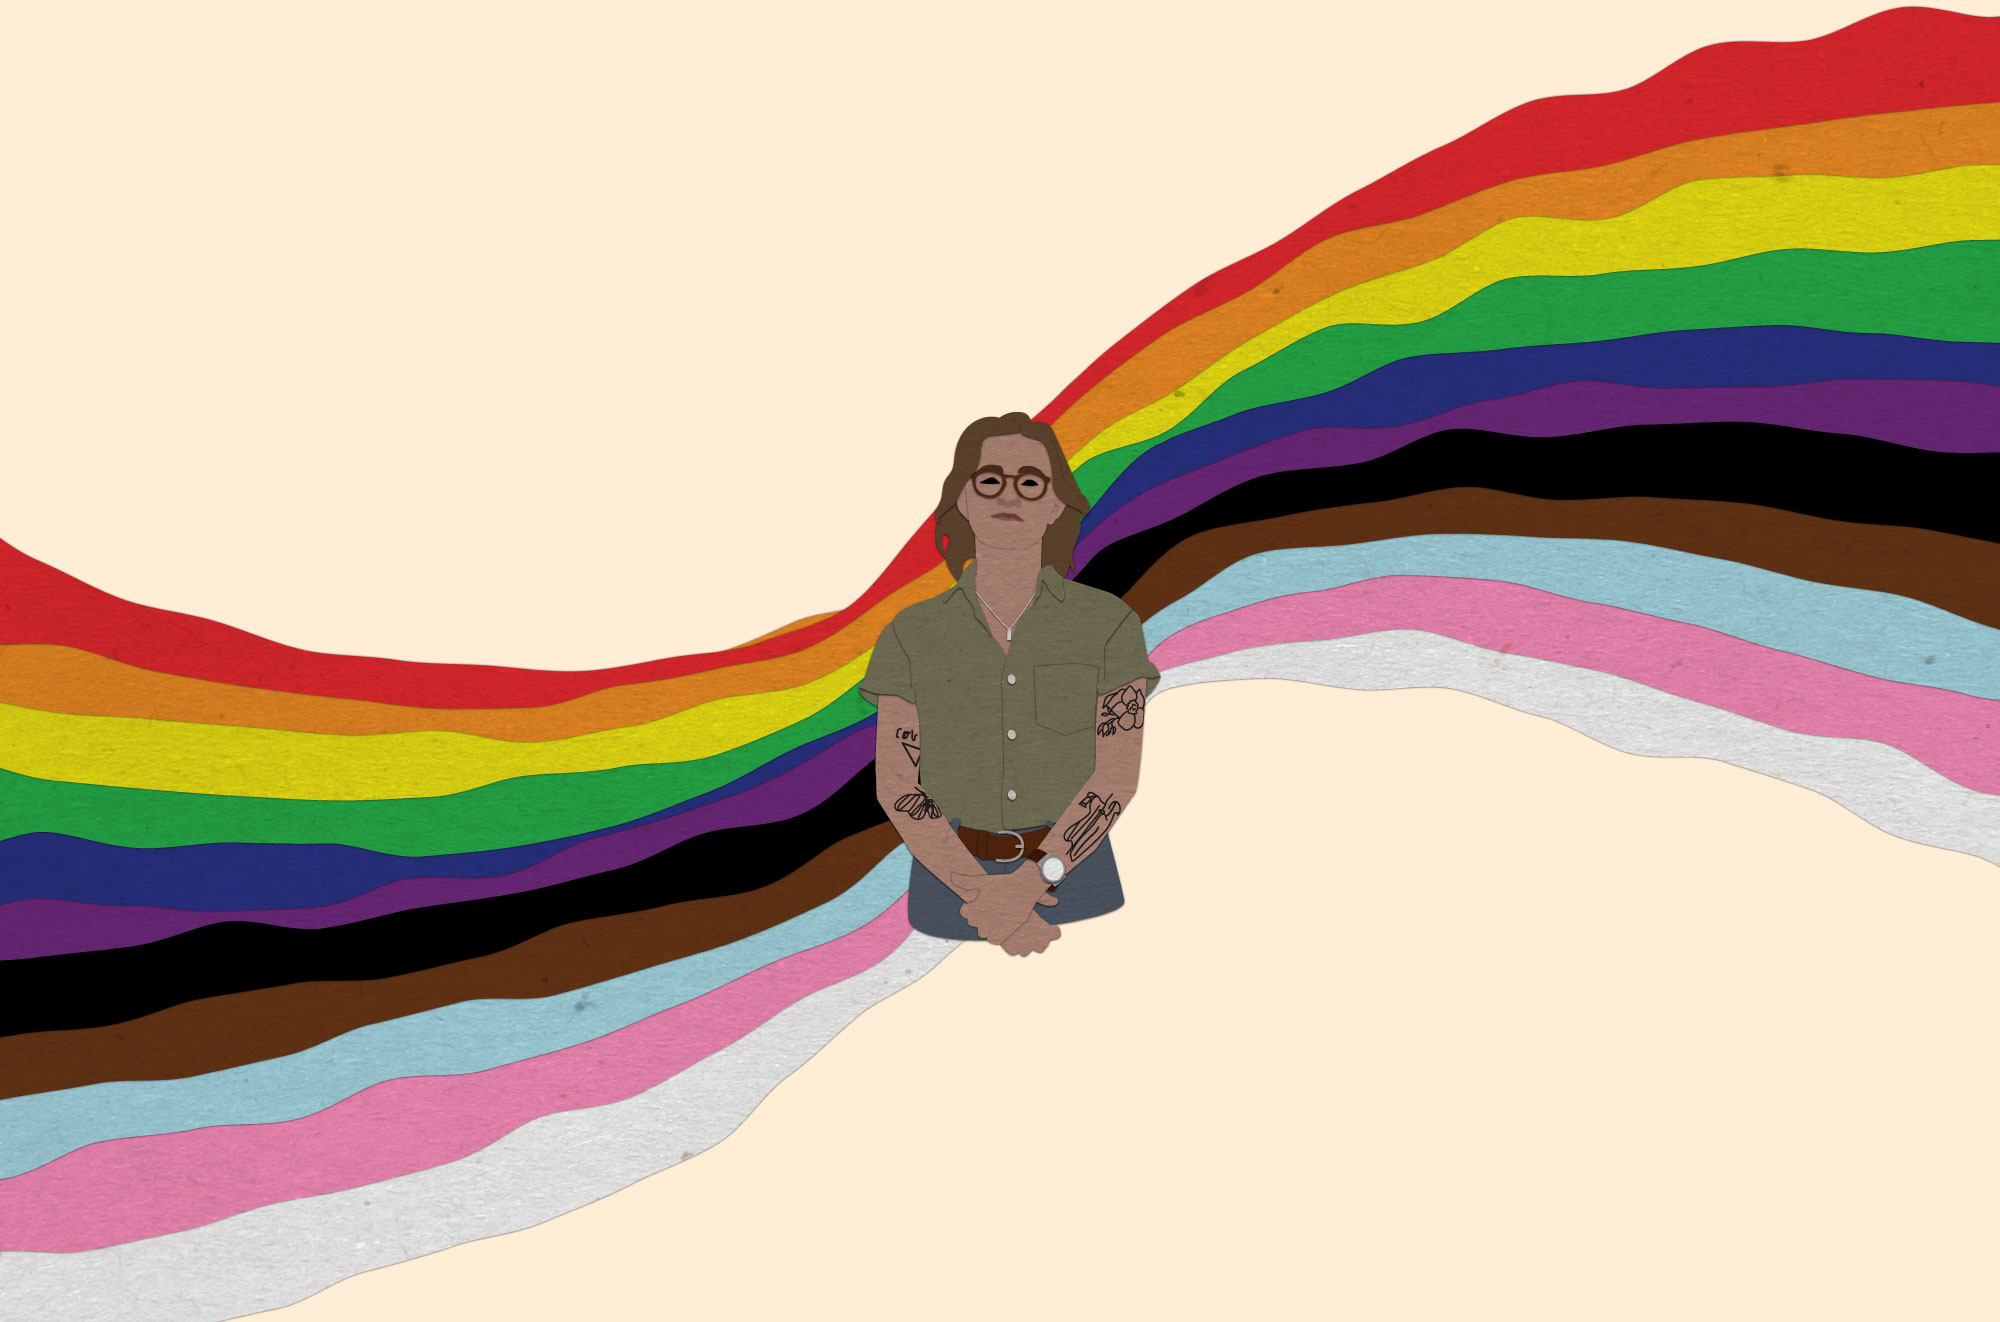 cut and arranged paper to resemble Shelby Hearn and a rainbow